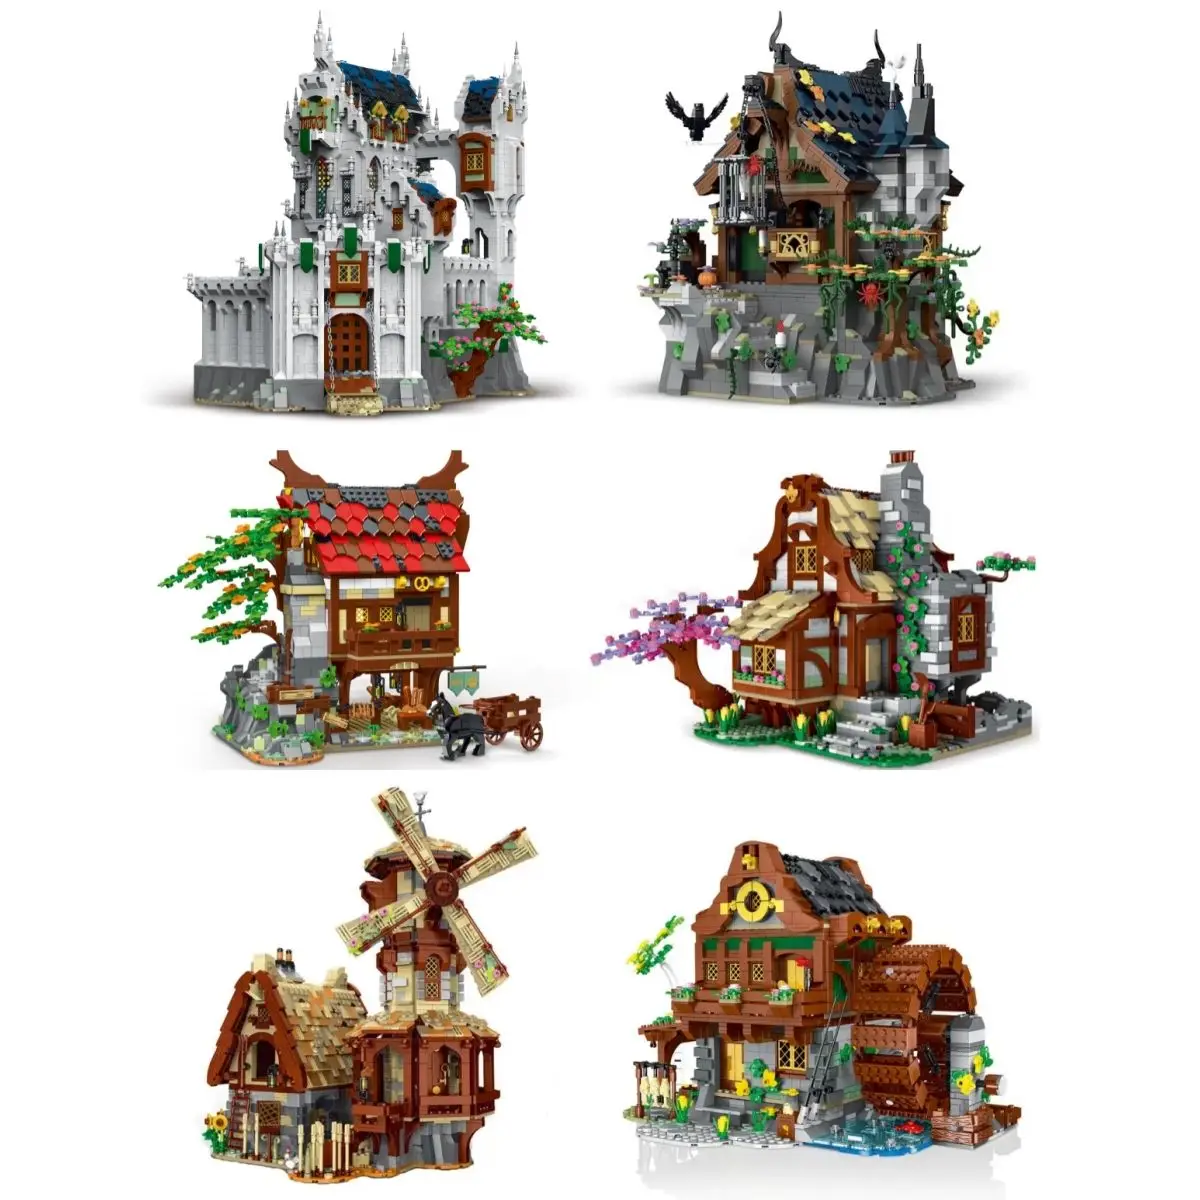 

MORK 033004-033011 middle ages street view church castle creative Decoration Building Block Plastic Toy gift for kids girls